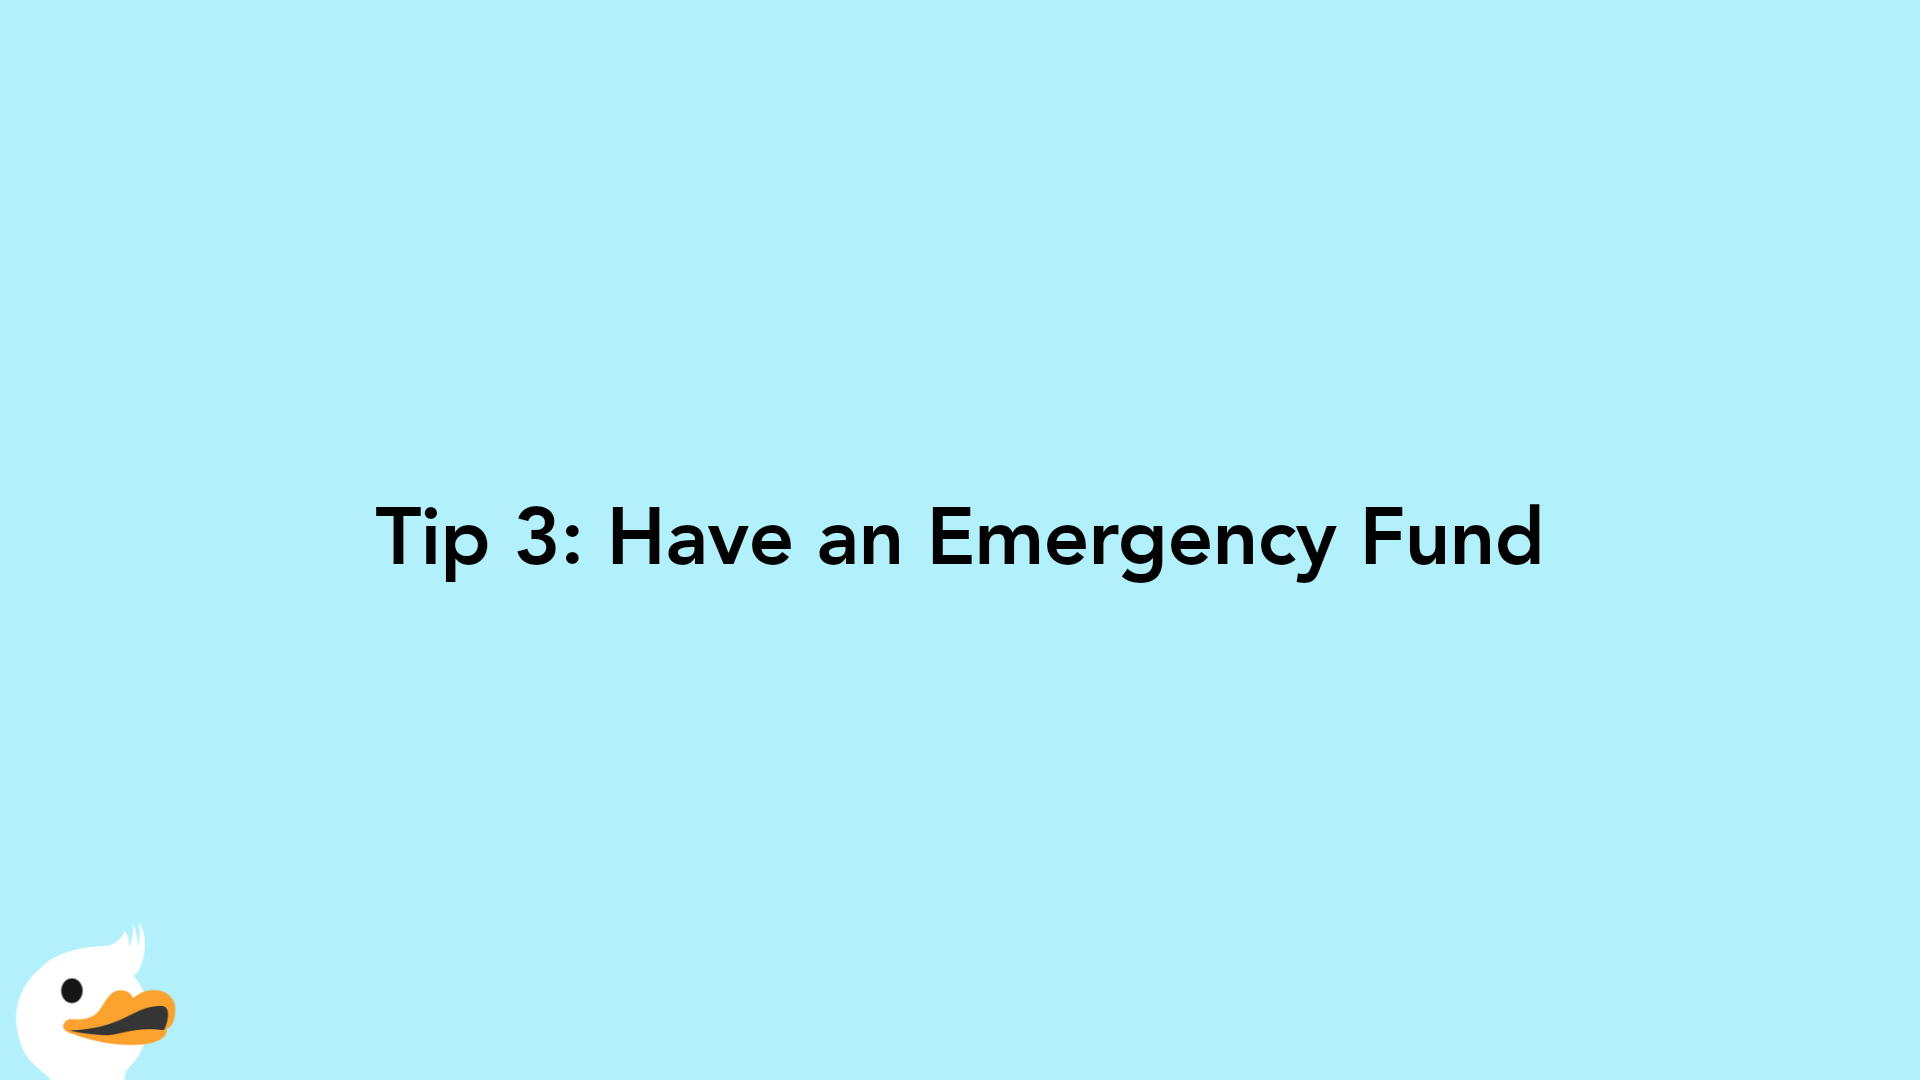 Tip 3: Have an Emergency Fund